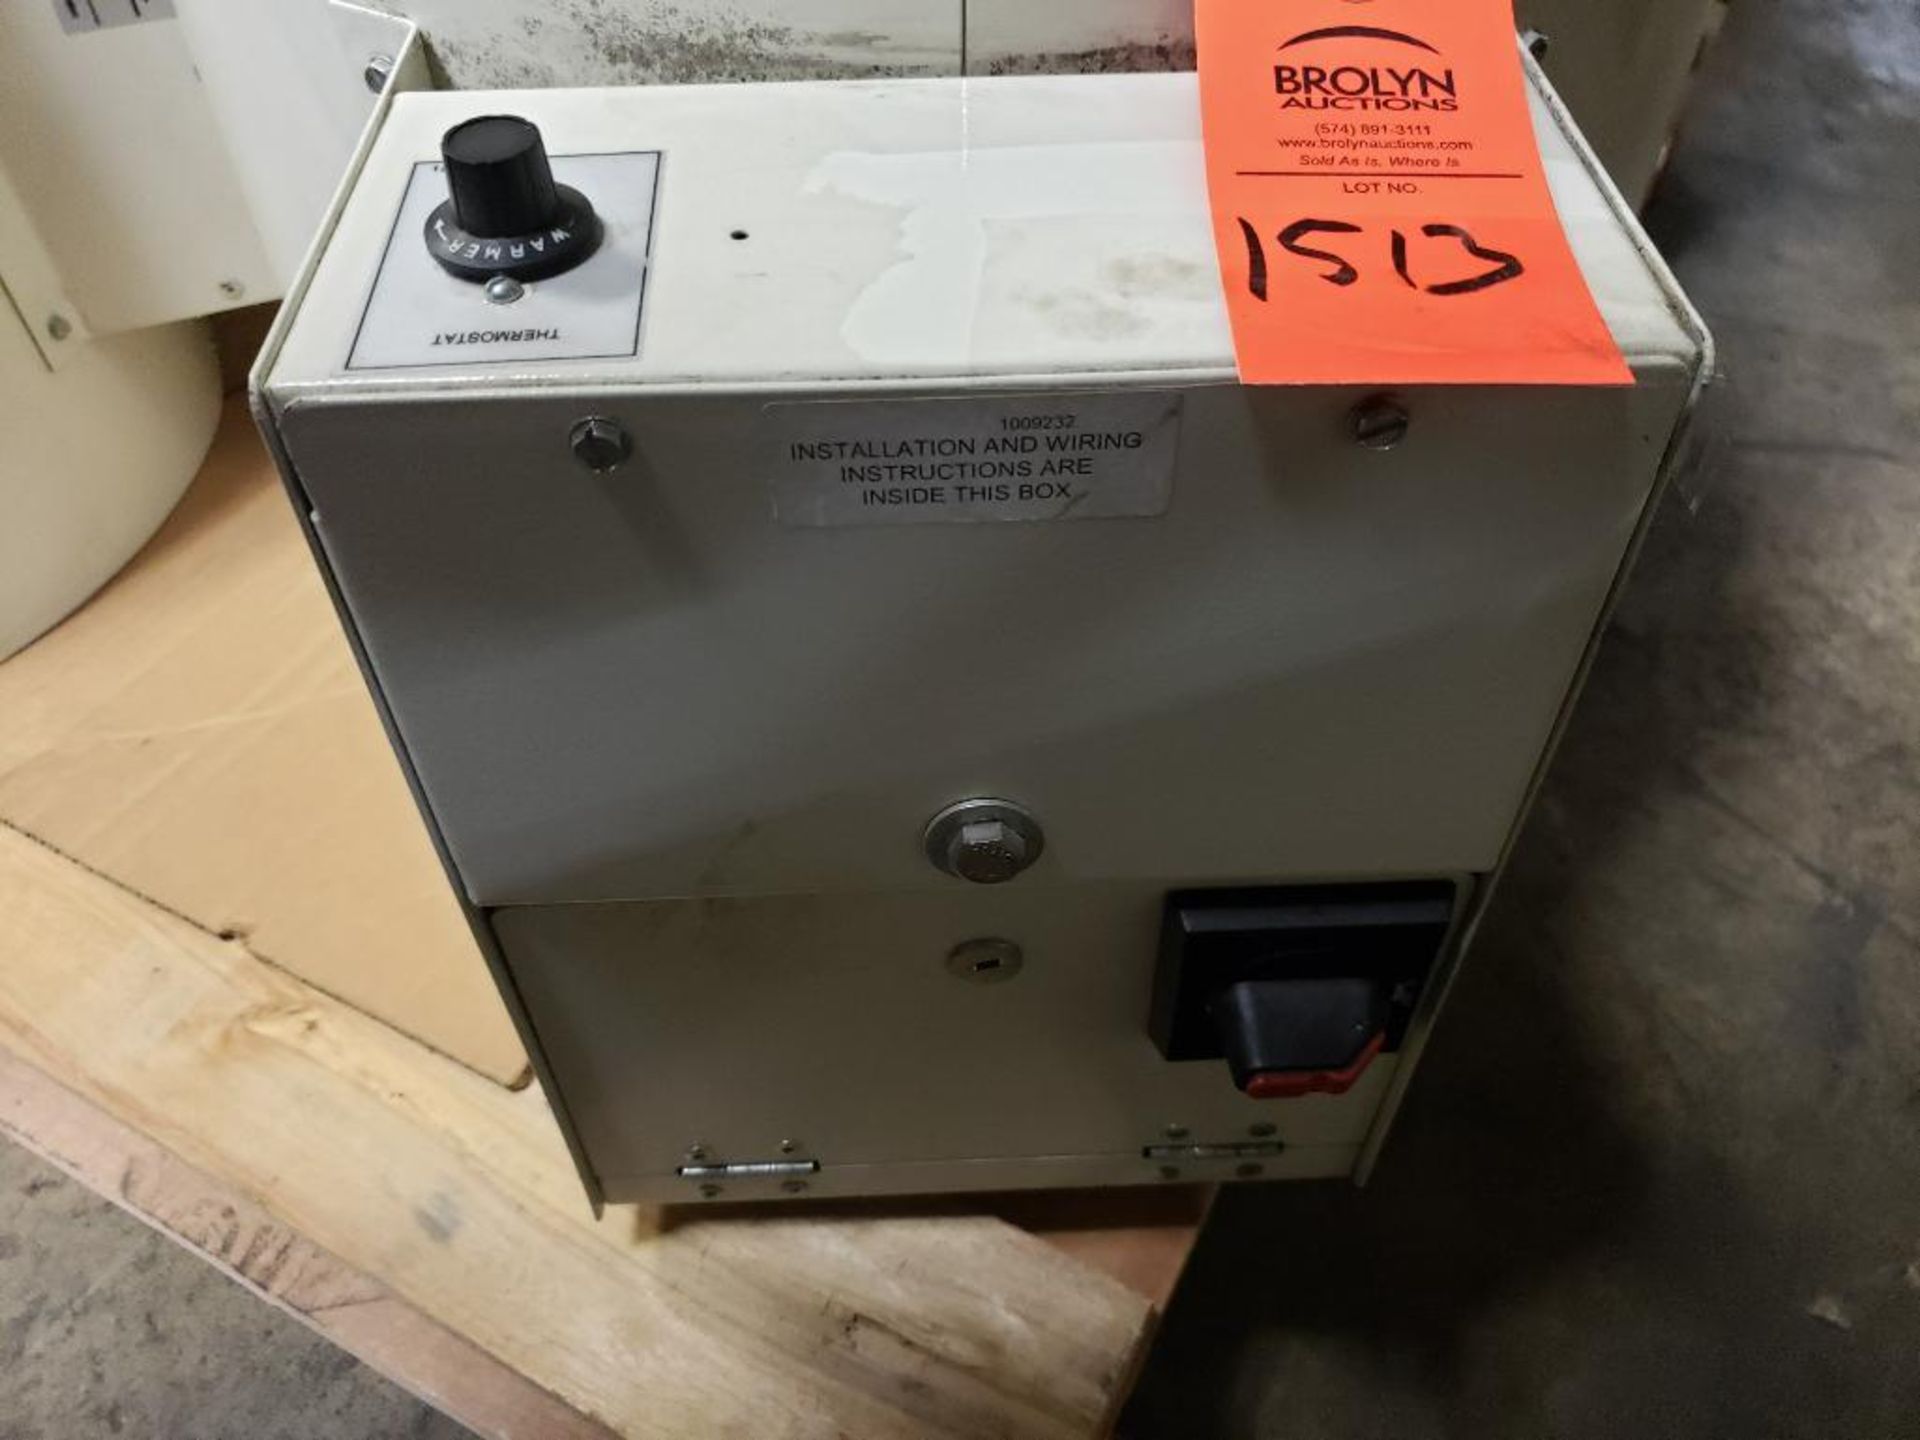 Indeeco industrial heater. 12.5kW. 3ph 480v. Catalog 238-UL13U-DHT. New old stock. - Image 3 of 5